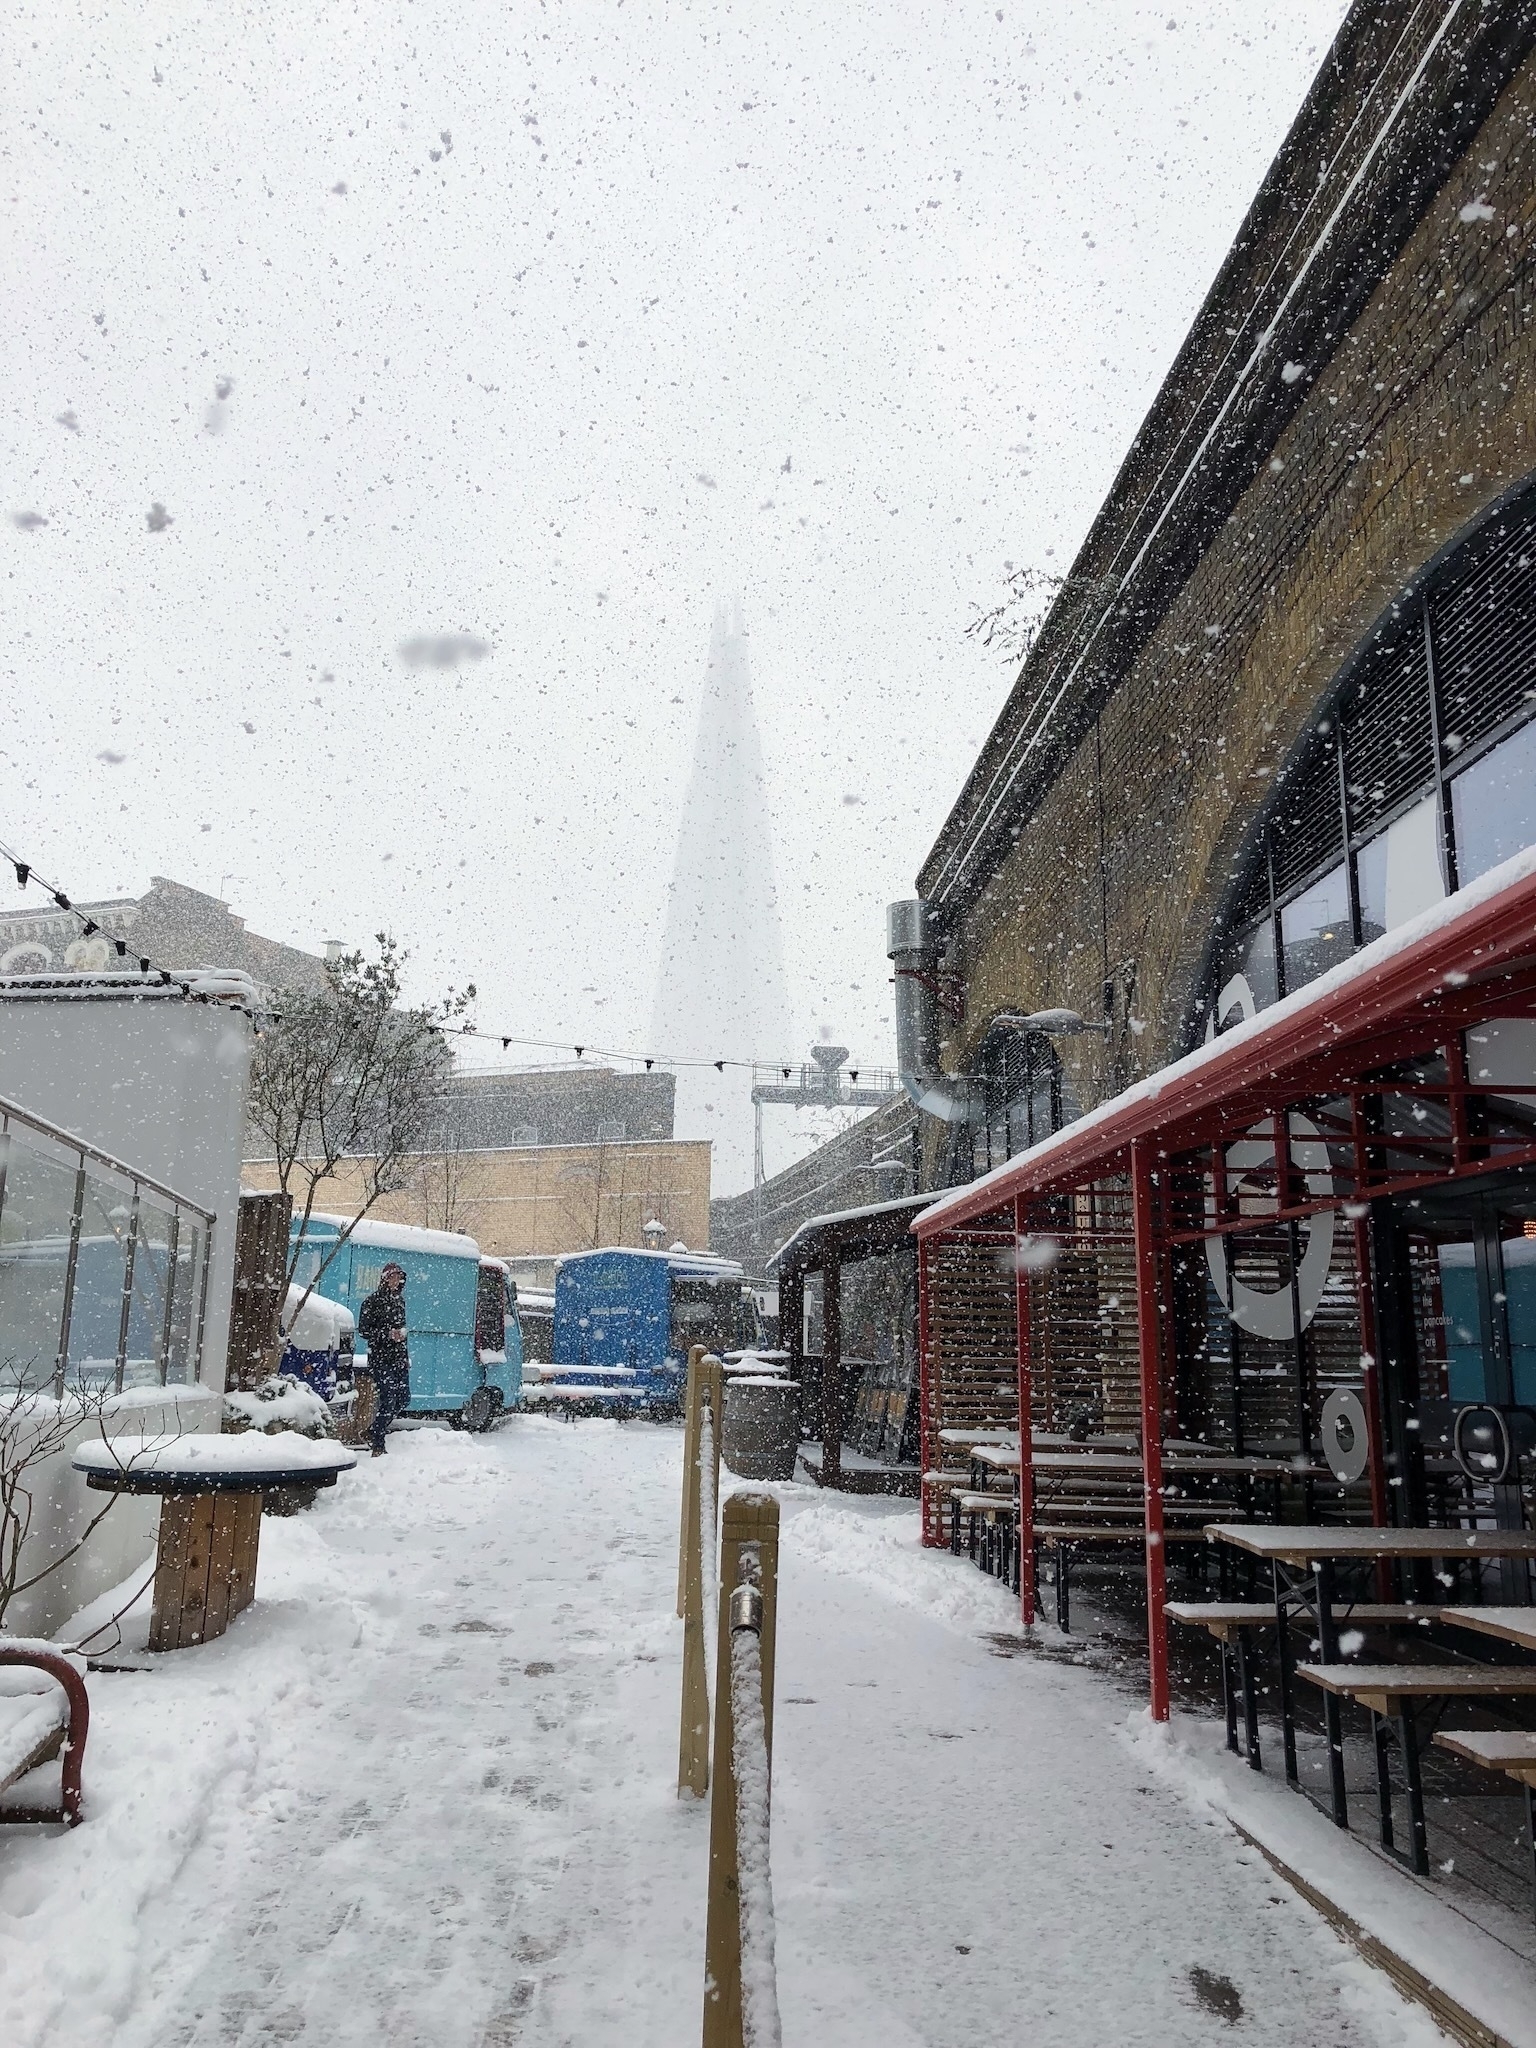 A snowy day in Southwark with the Shard barely visible